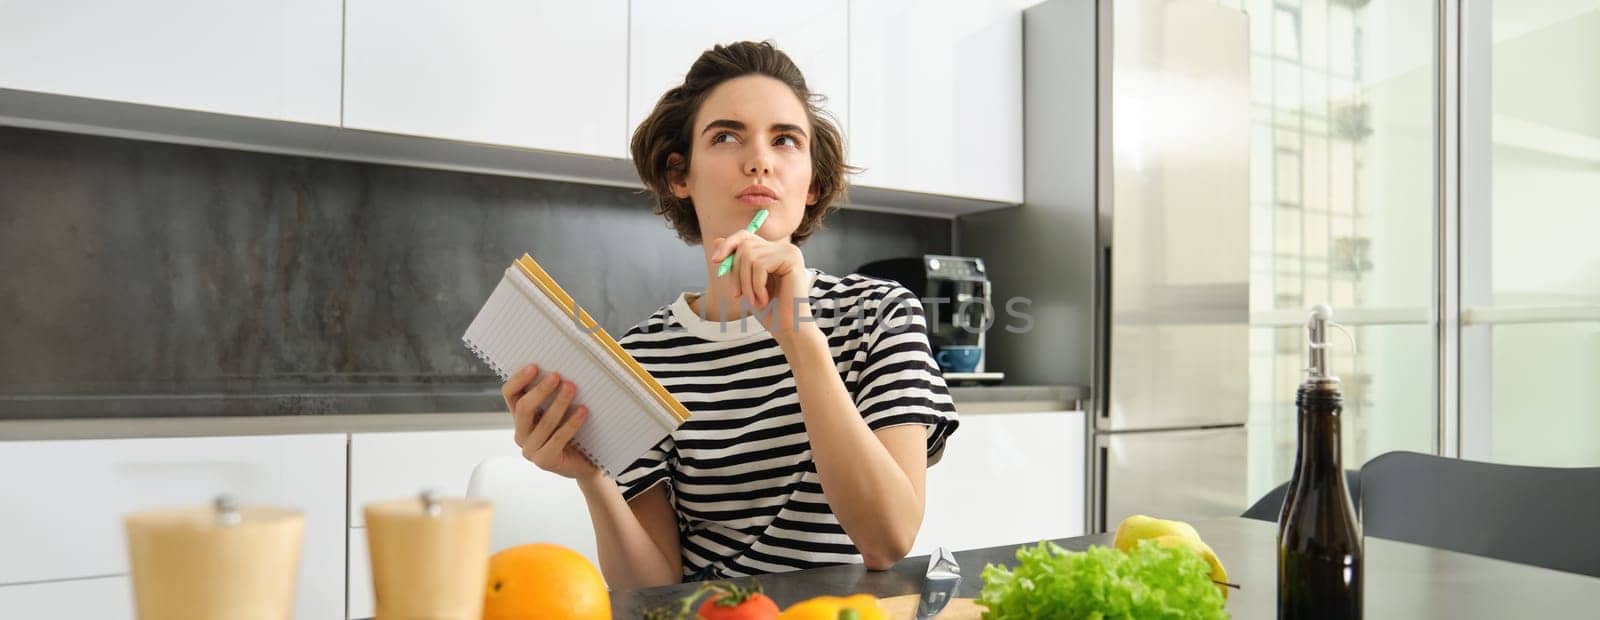 Portrait of thinking woman with notebook, cooking, writing down recipe ingredients, deciding on a meal for dinner, sitting near vegetables and chopping board in kitchen.